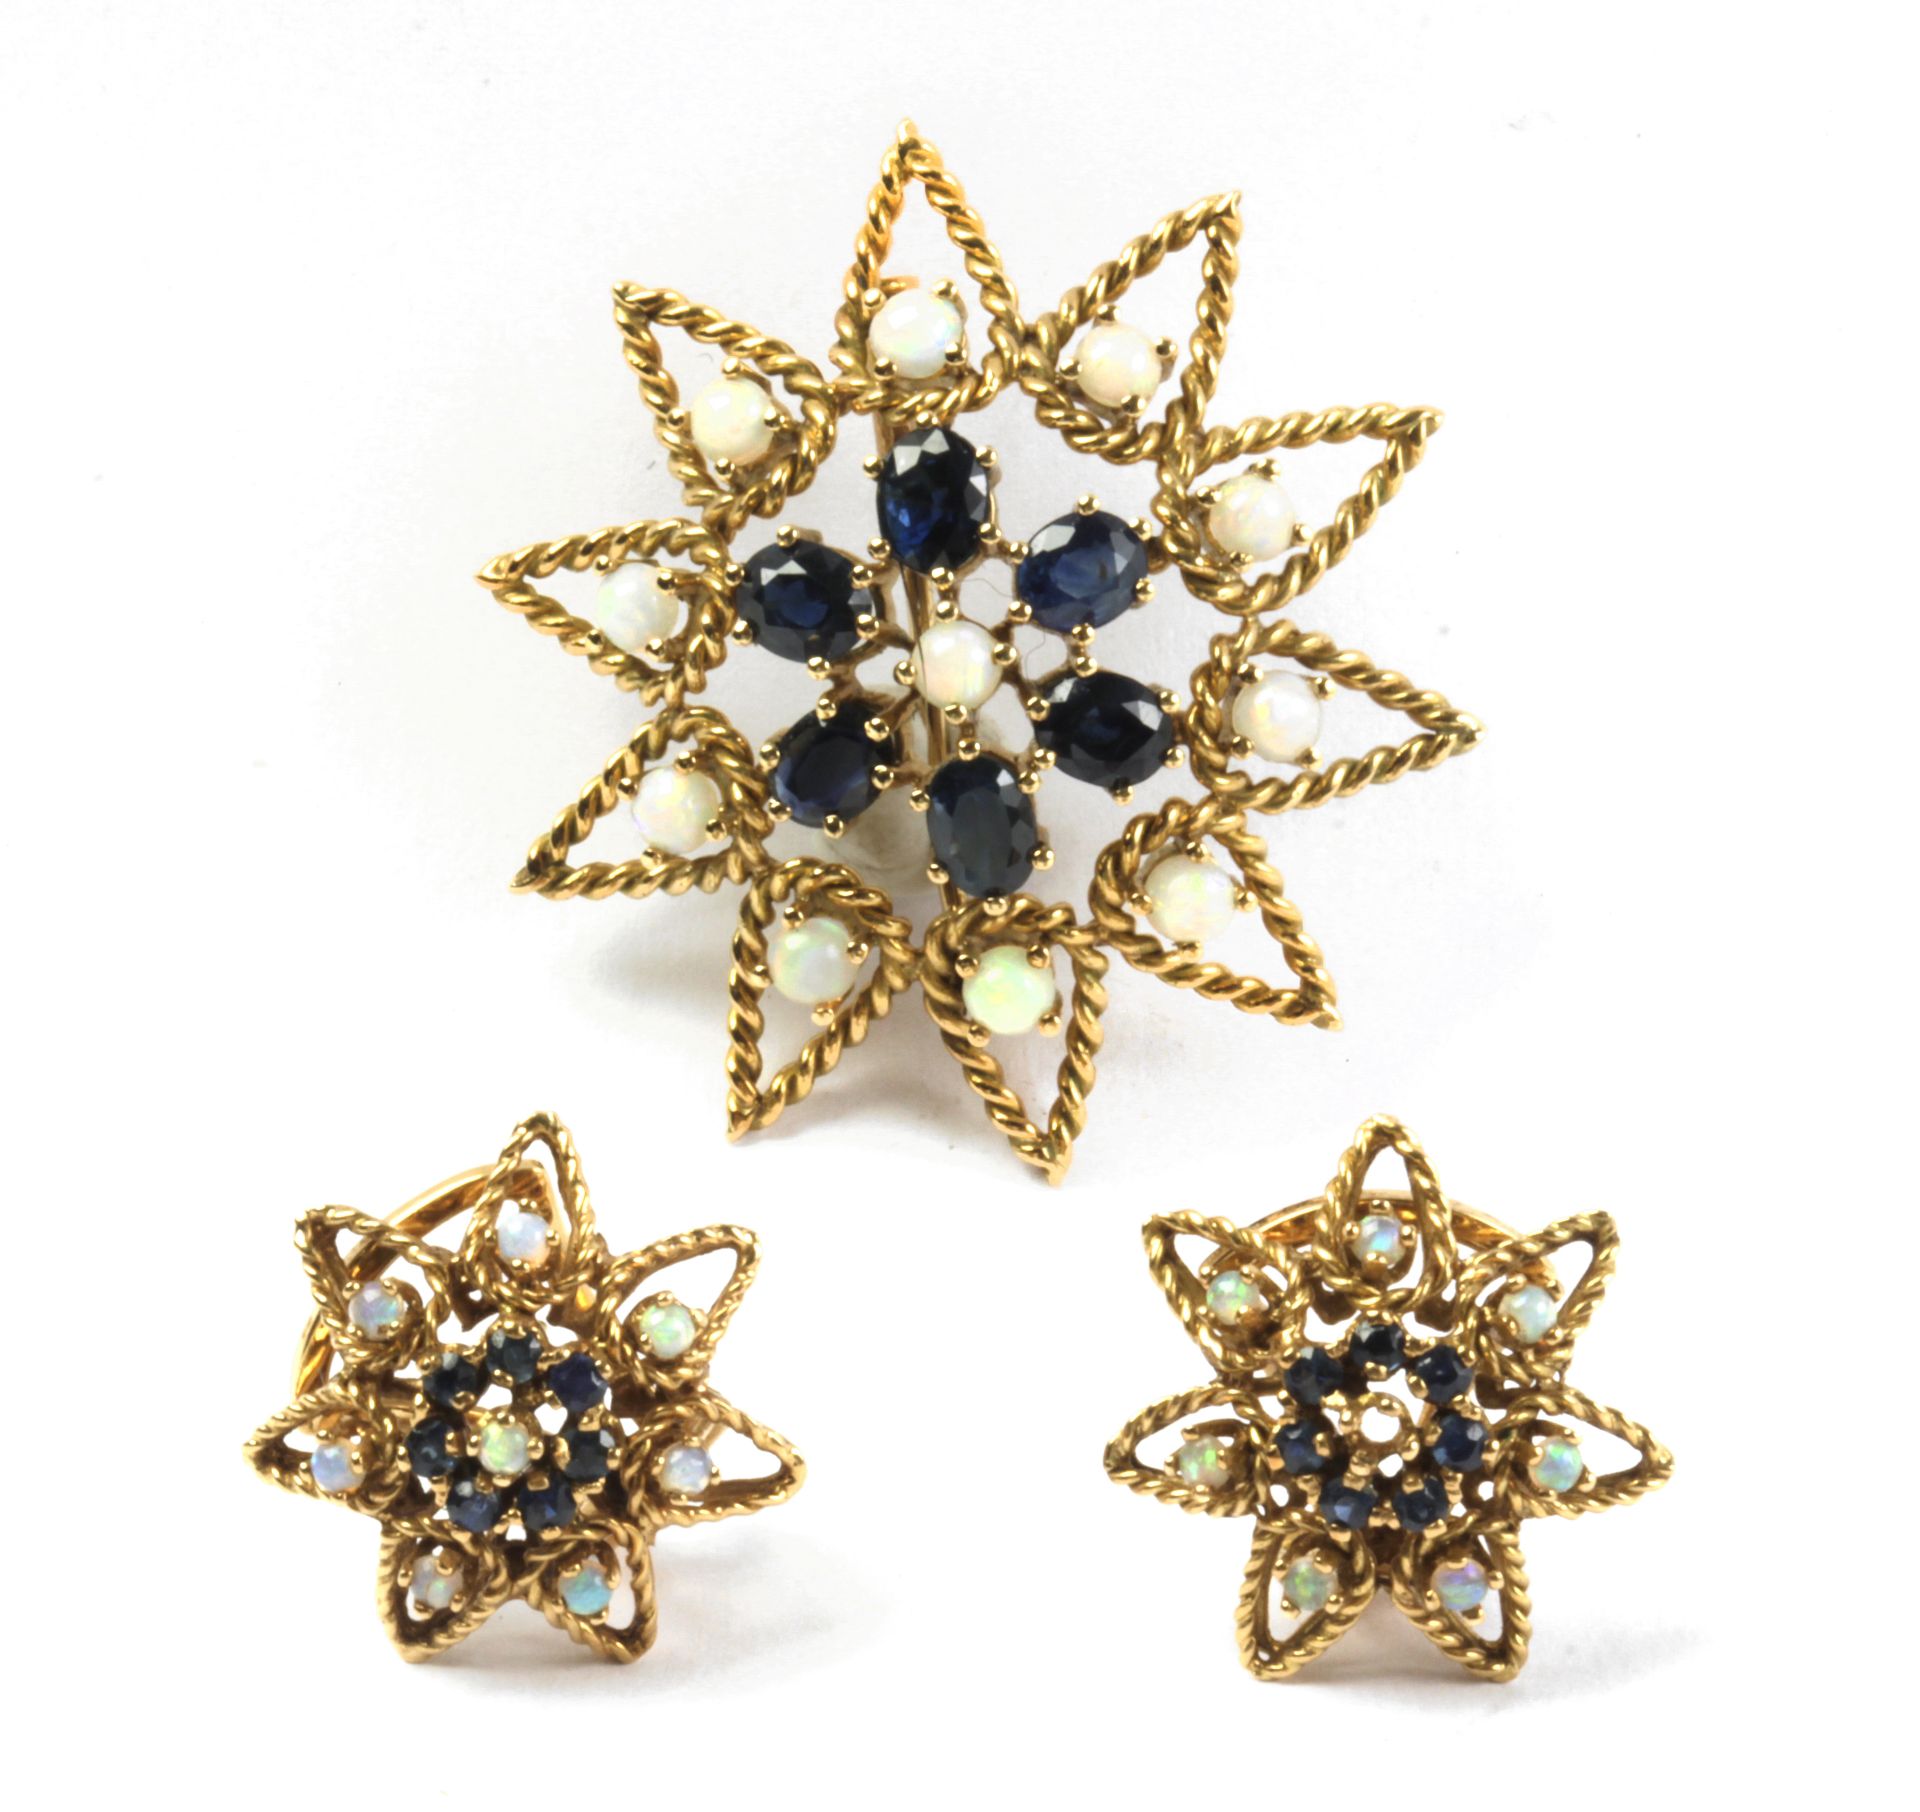 A sapphire and precious opal set of brooch and earrings with an 18k. yellow gold setting